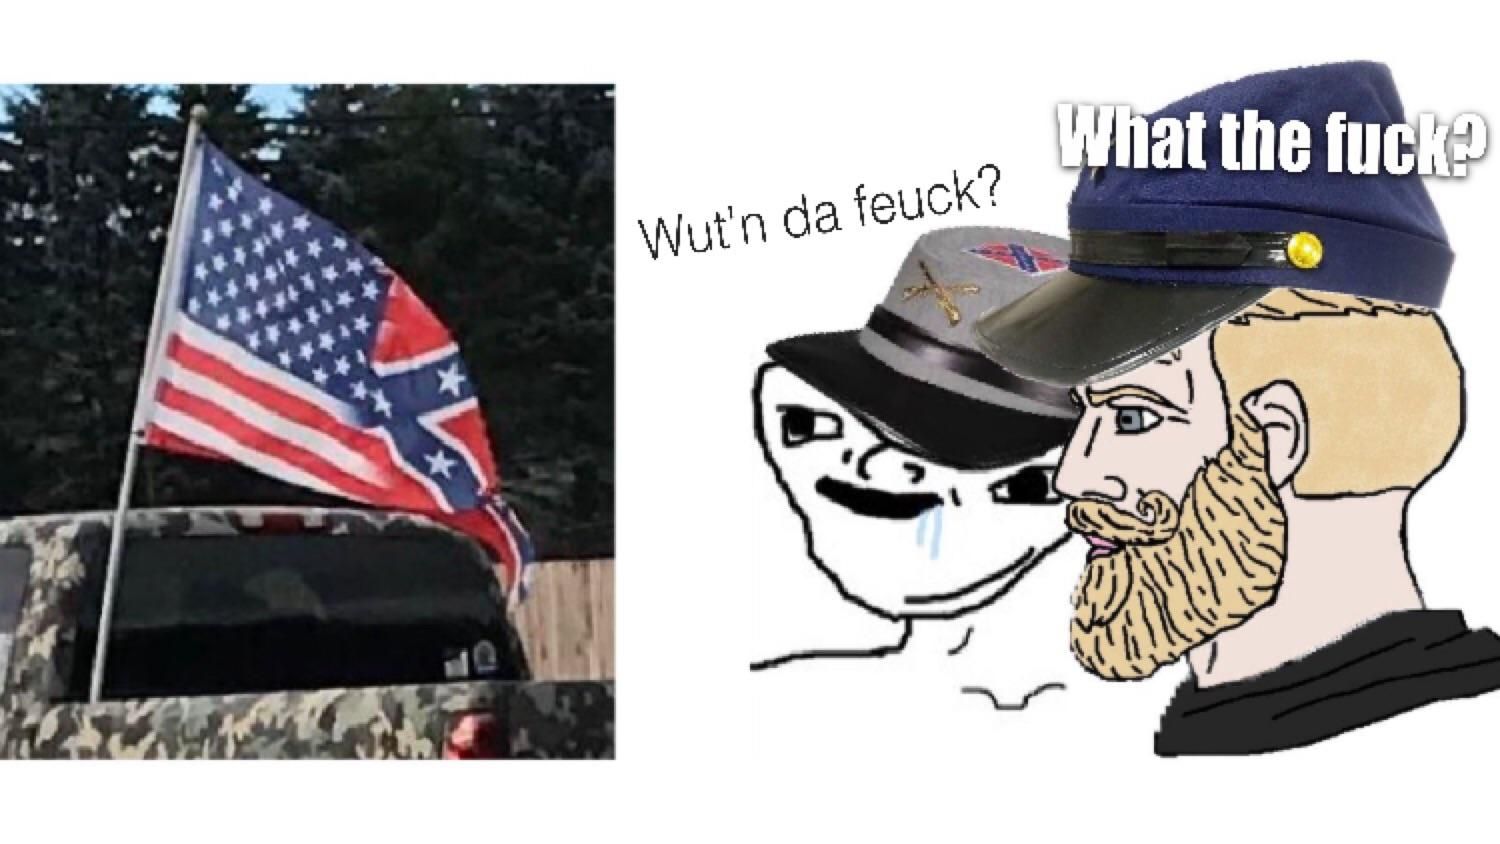 Ah yes, the Confederate Union flag.